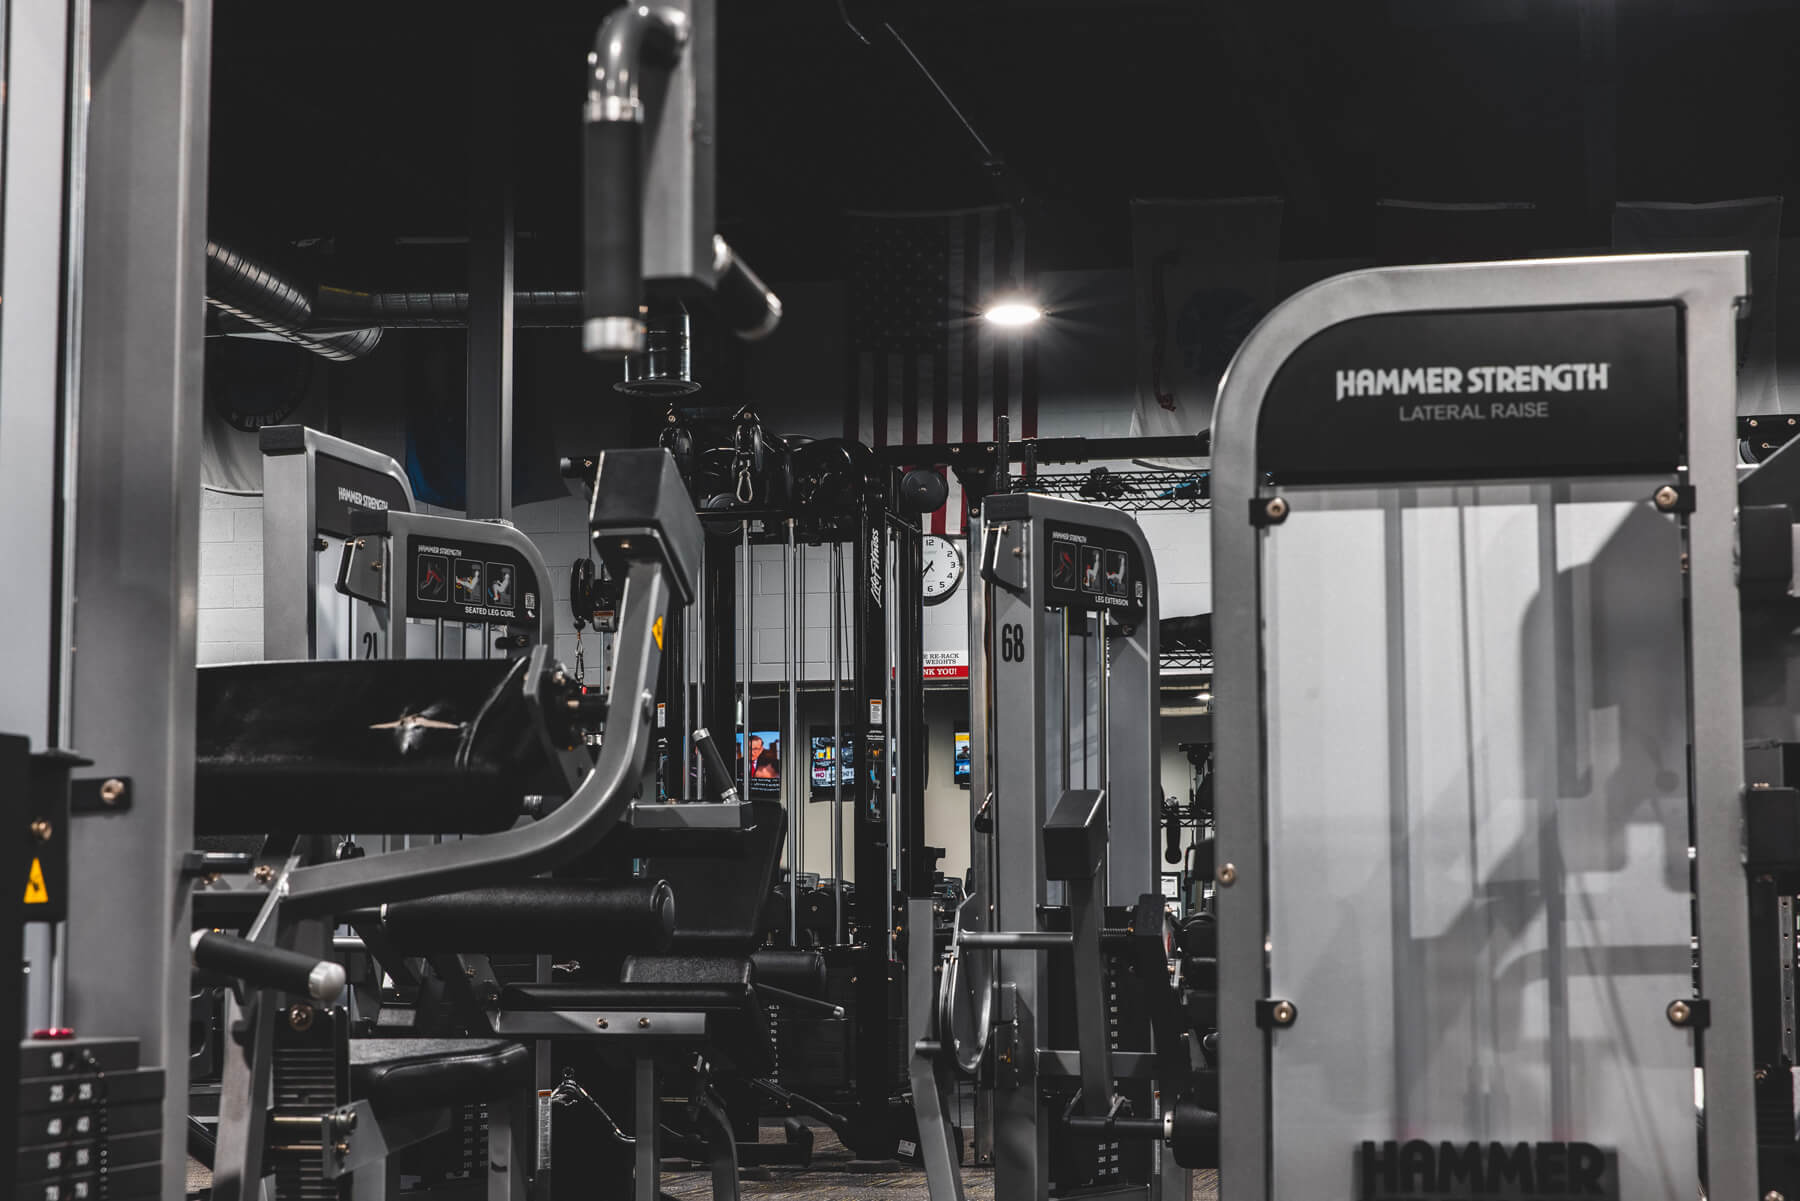 An Image of the Milford, MI Powerhouse Gym Location